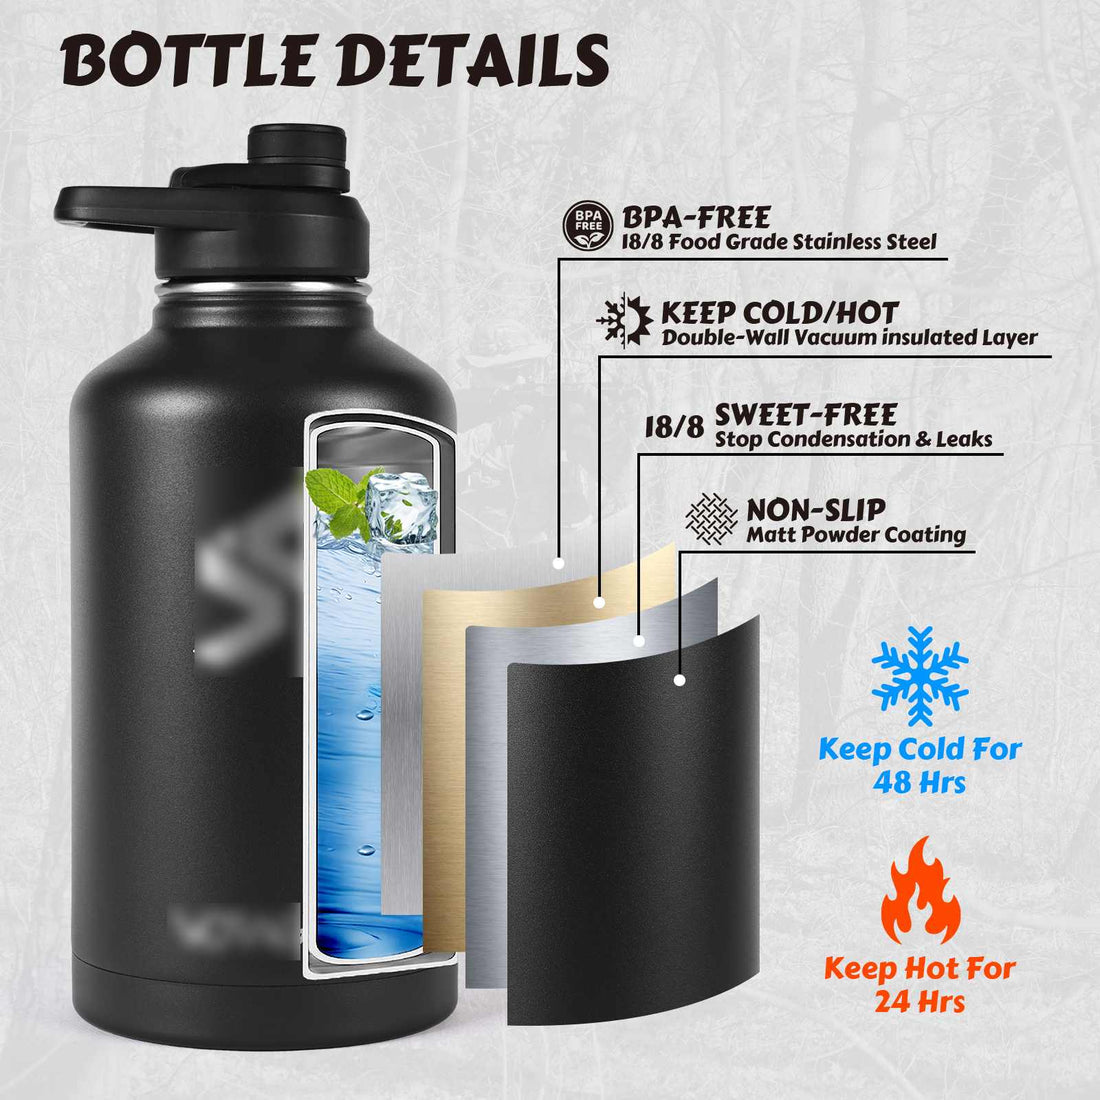 64Oz Half Gallon Stainless Steel Insulated Tactical Water Bottle with Metal Military Water Bottle Tactical Carrier Bag